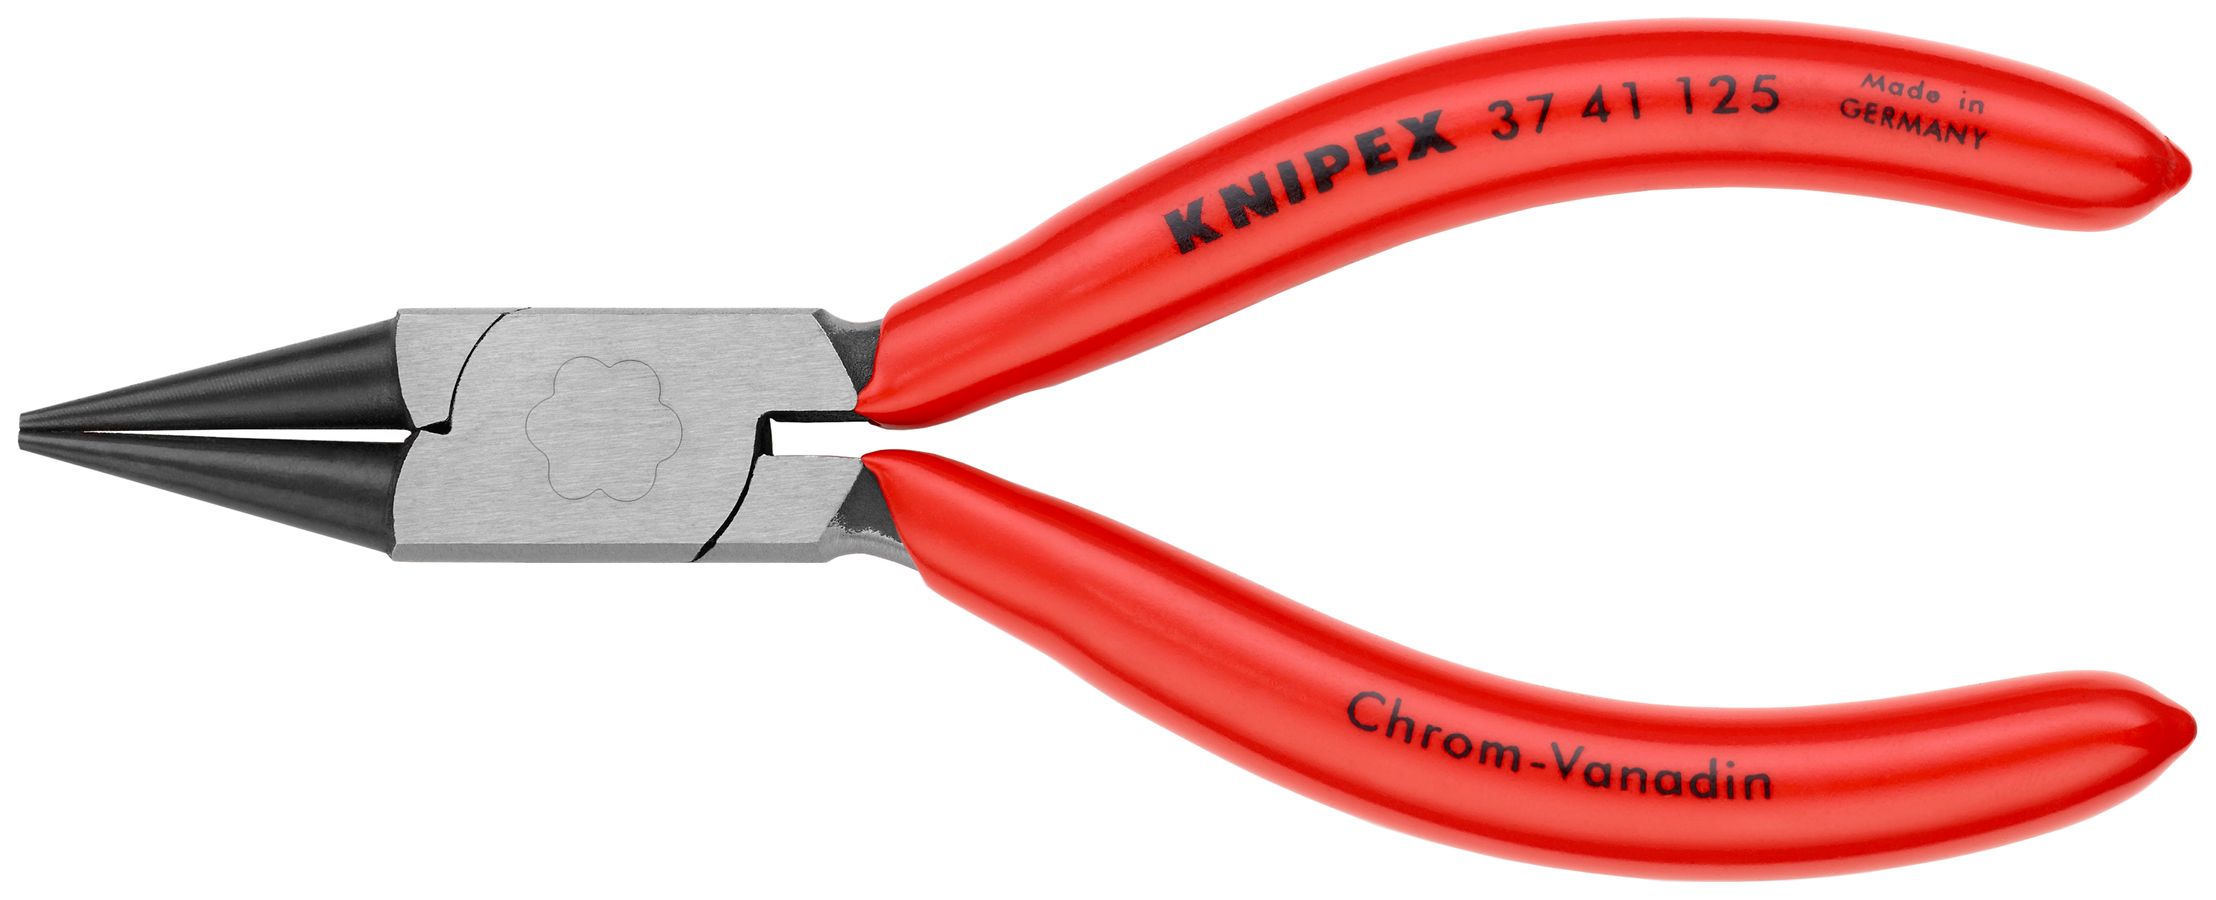 Electronics Gripping Pliers-Round Pointed Tips | KNIPEX Tools